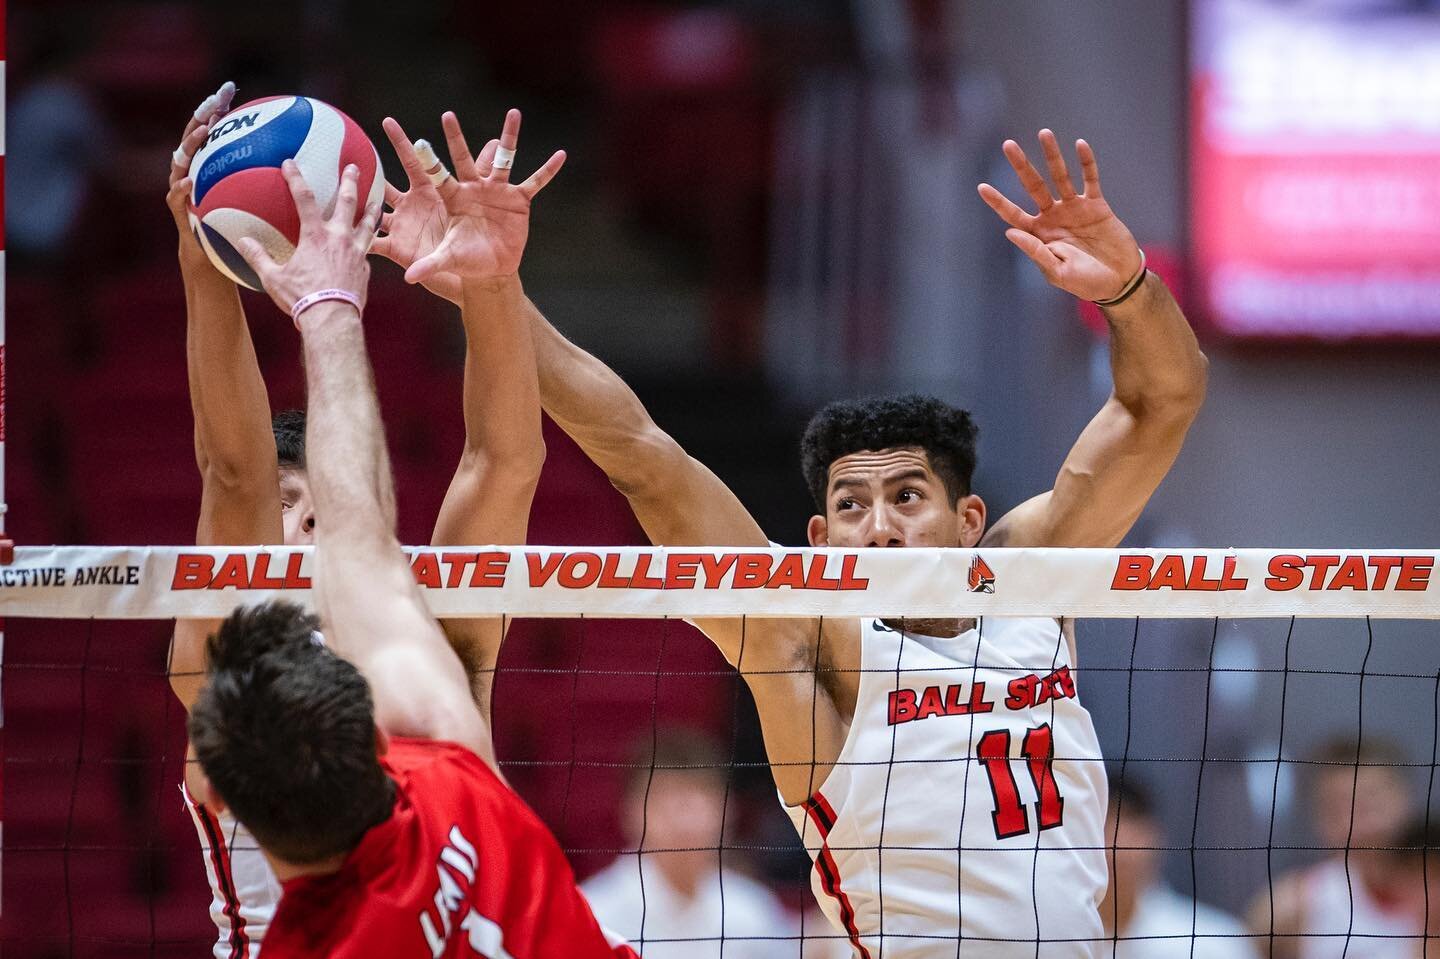 Ball State&rsquo;s Men&rsquo;s Volleyball swept Lewis on Wednesday evening 3-0. The Cardinals advance to the MIVA Championship round on Saturday. 

#ballstate #ballstateuniversity #ballstatemvb #collegevolleyball #ncaavolleyball @ballstatemvb